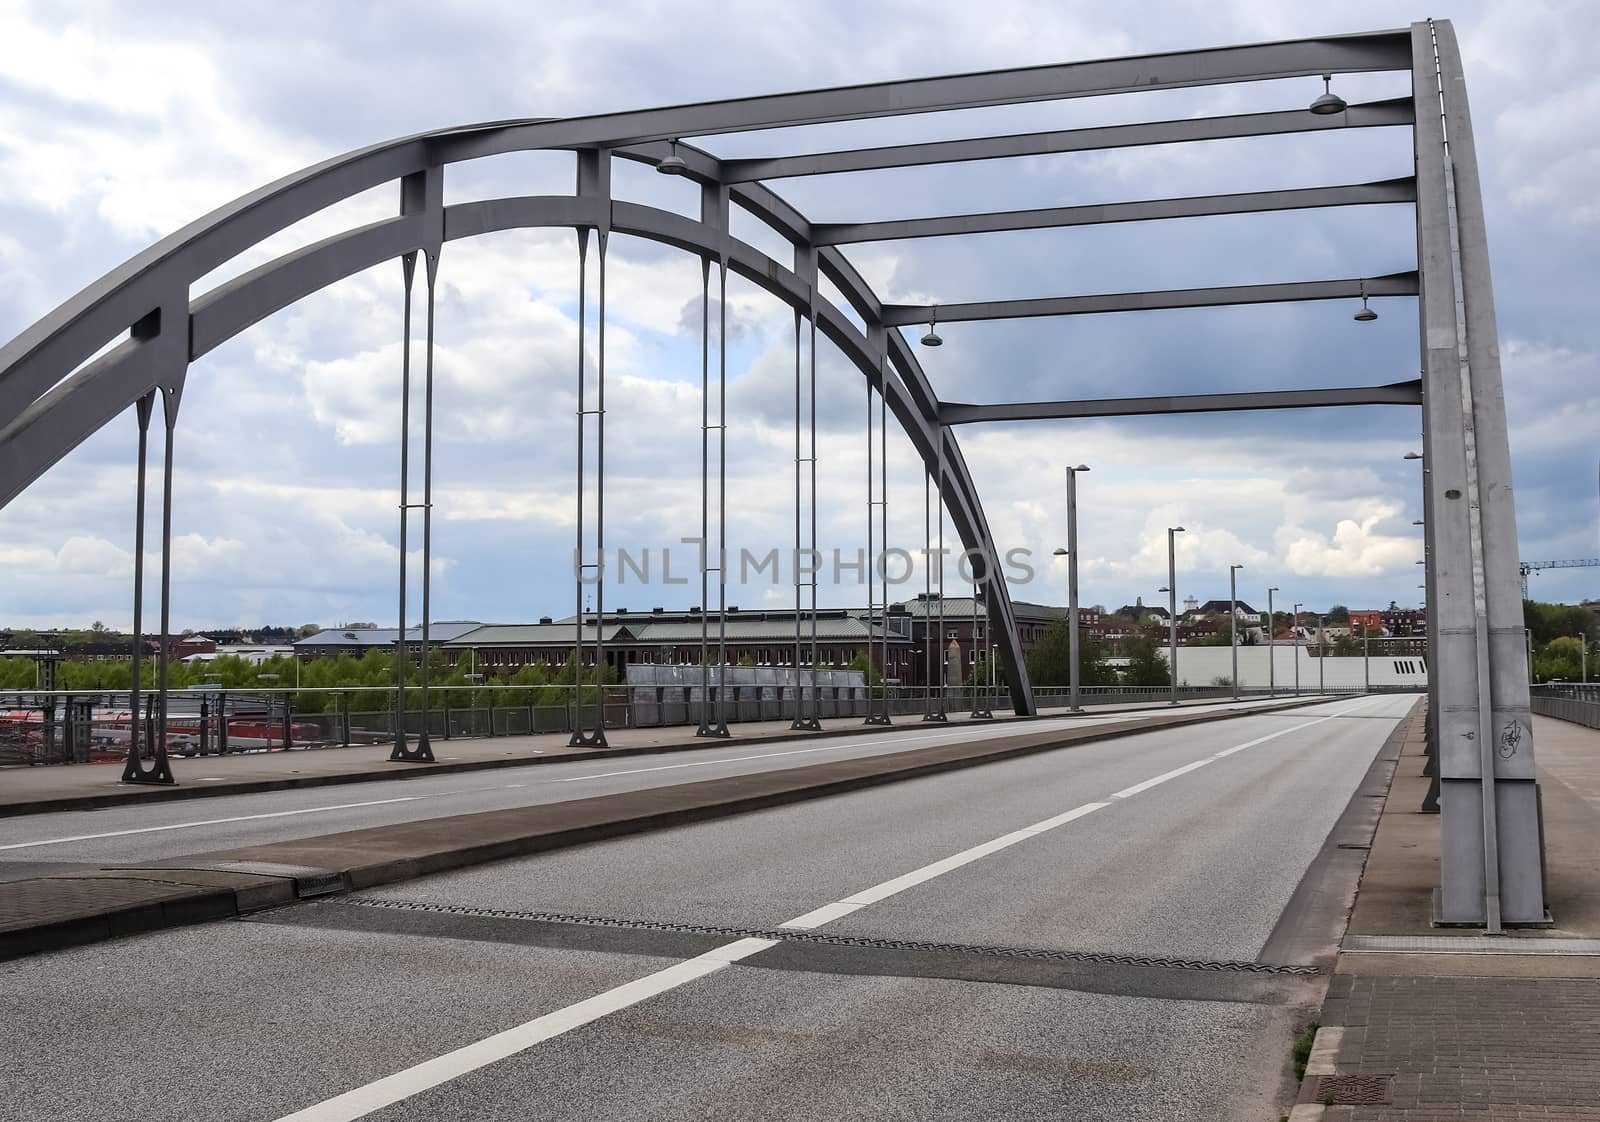 Empty bridge in the streets of Kiel in Germany during the corona by MP_foto71